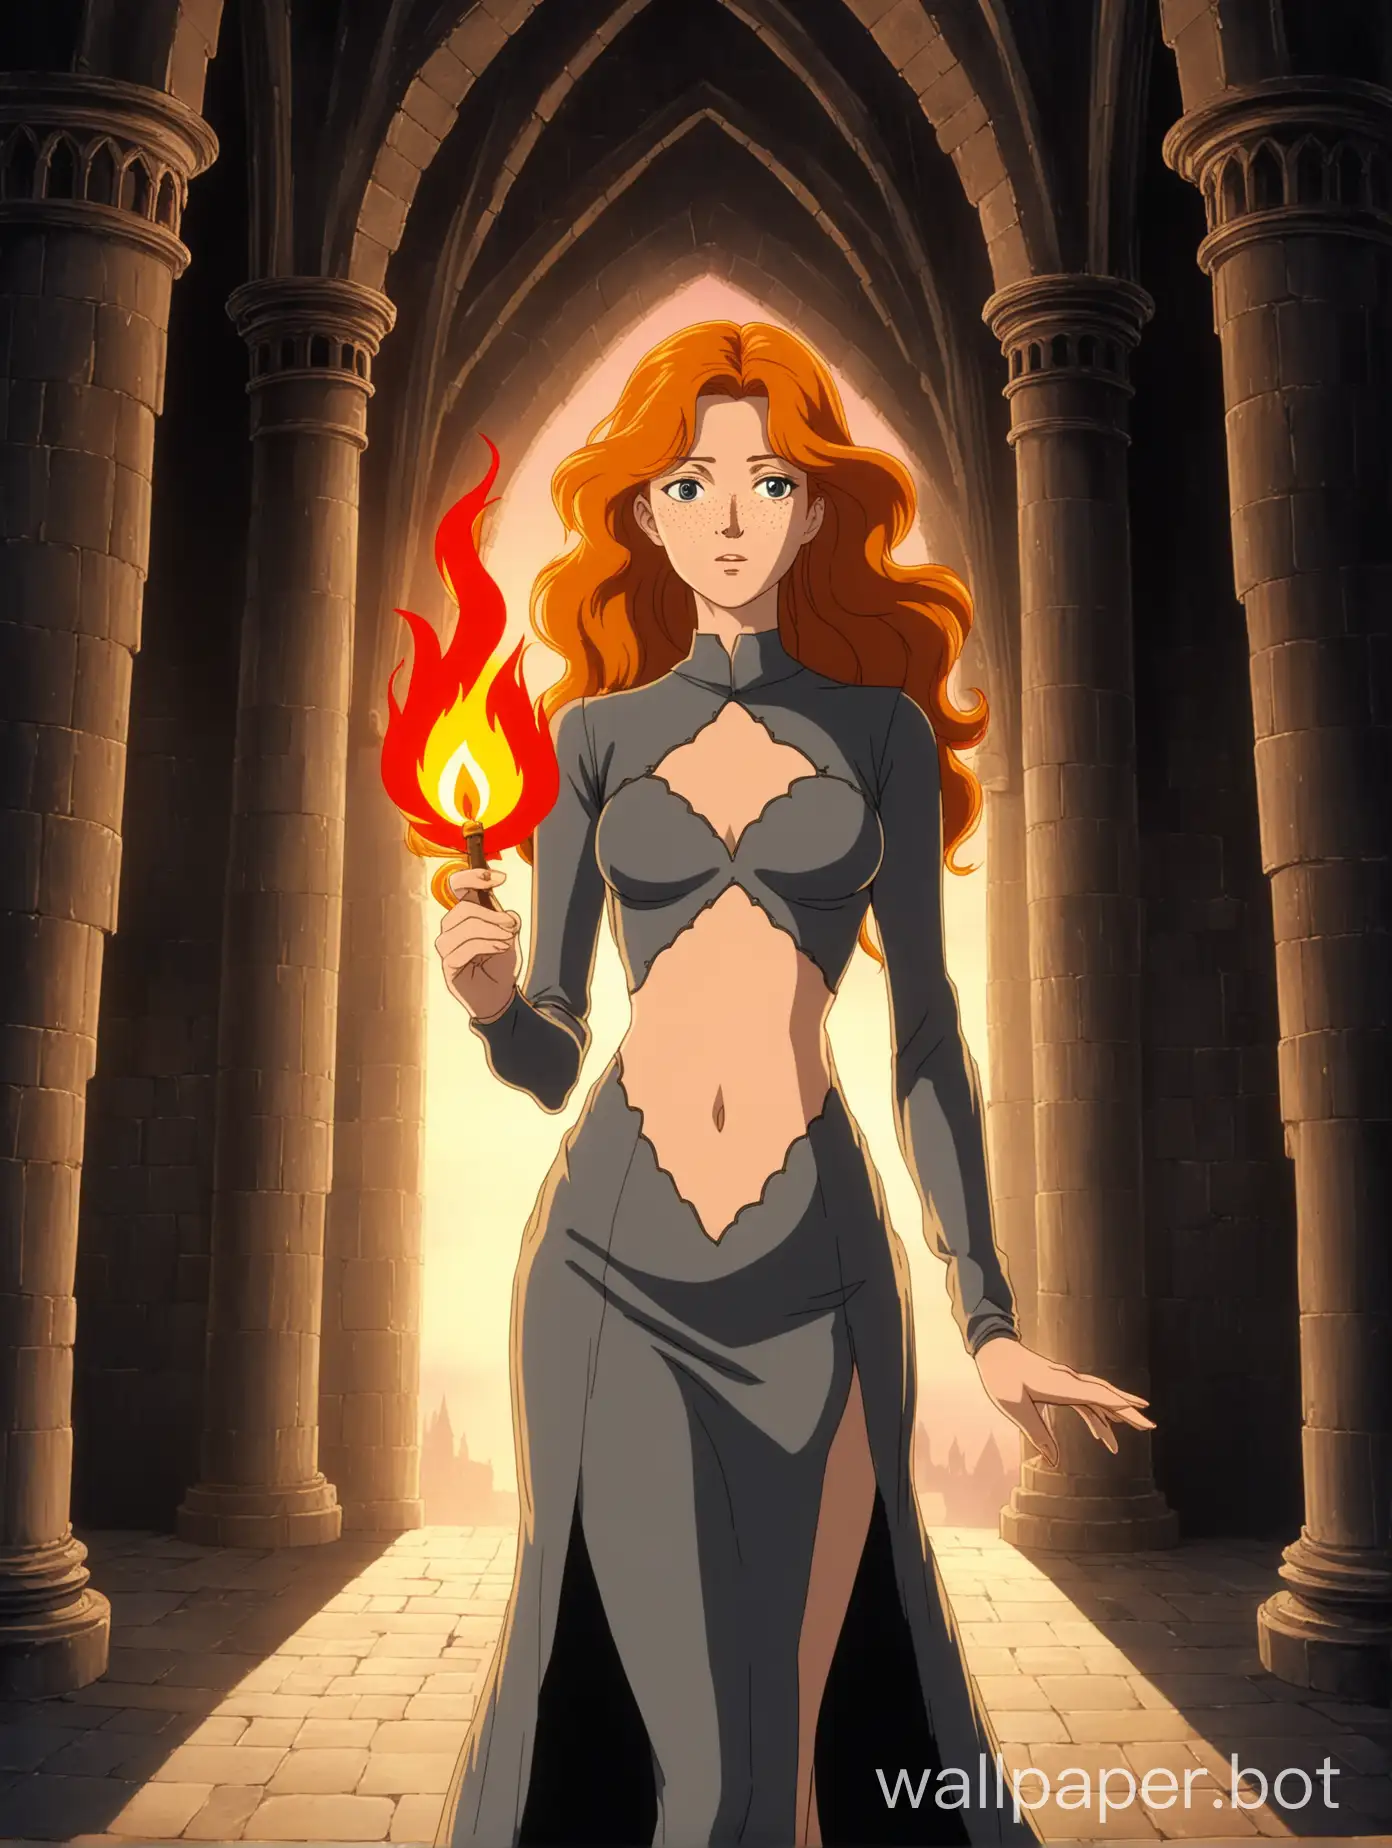 Regal-Woman-Holding-Flame-in-Medieval-Castle-Interior-1980s-Retro-Anime-Inspired-Art